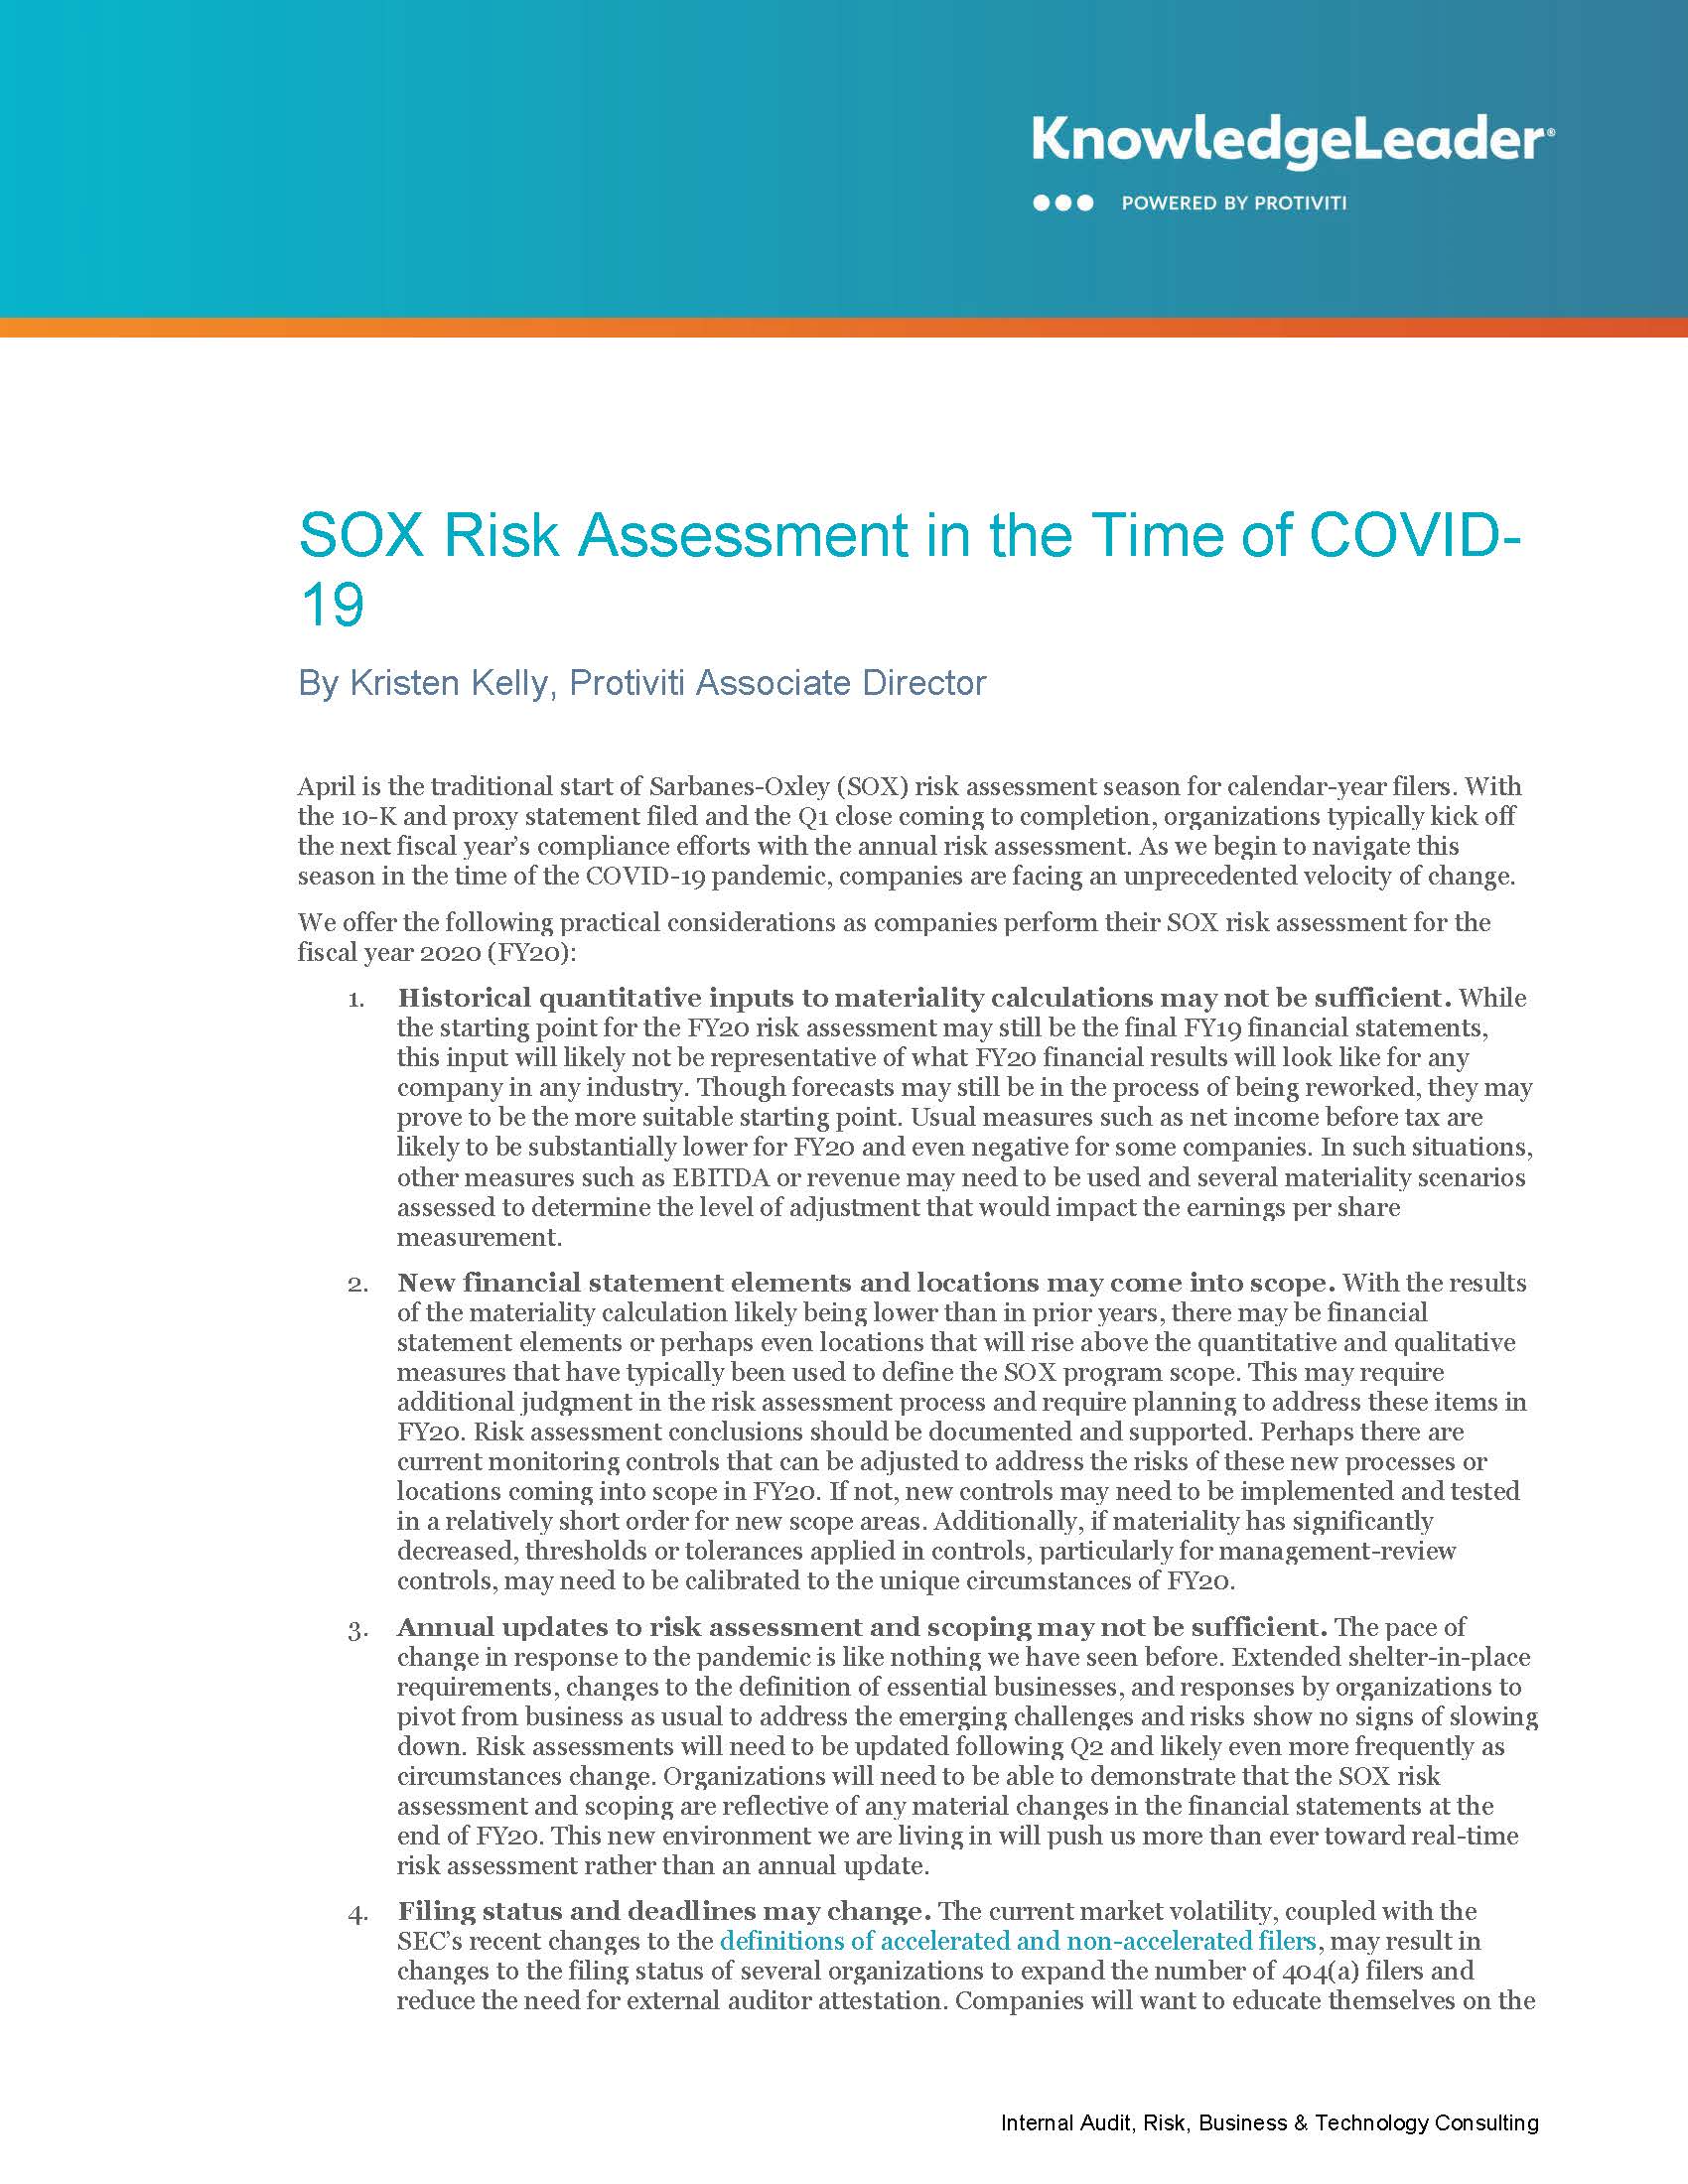 SOX Risk Assessment in the Time of COVID-19